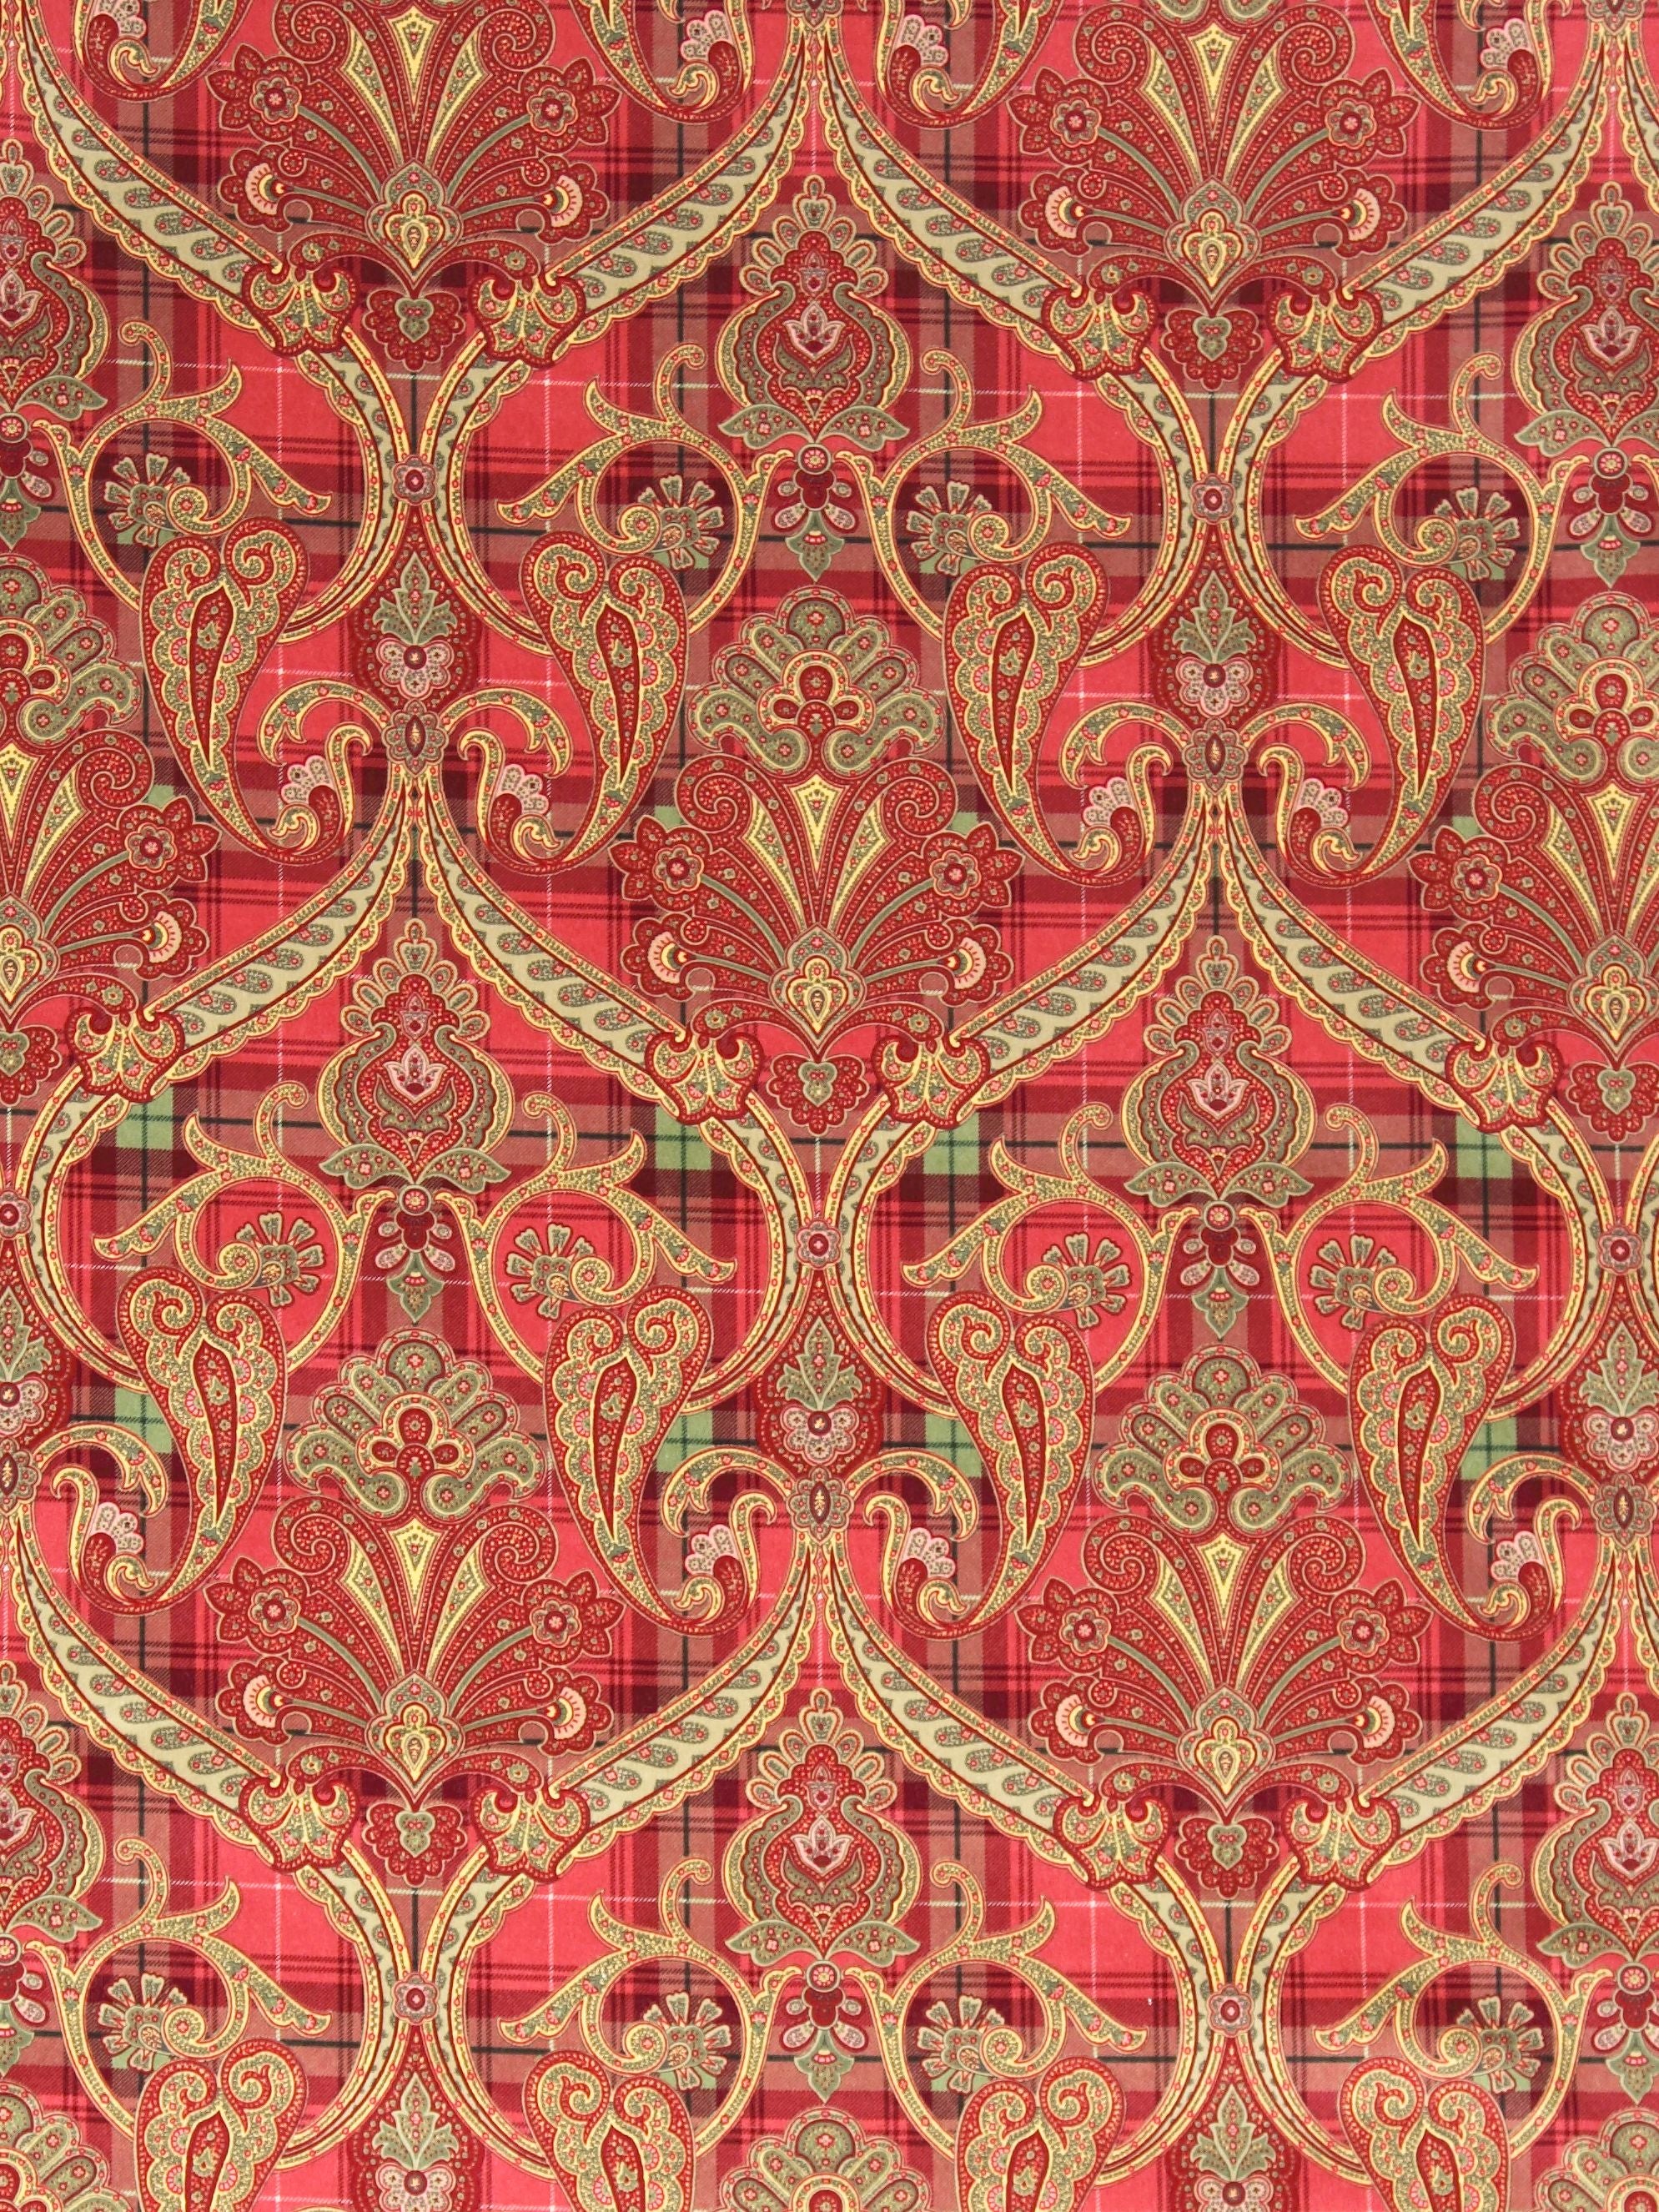 Highland Fling fabric in reds and pink color - pattern number SC 000116316 - by Scalamandre in the Scalamandre Fabrics Book 1 collection